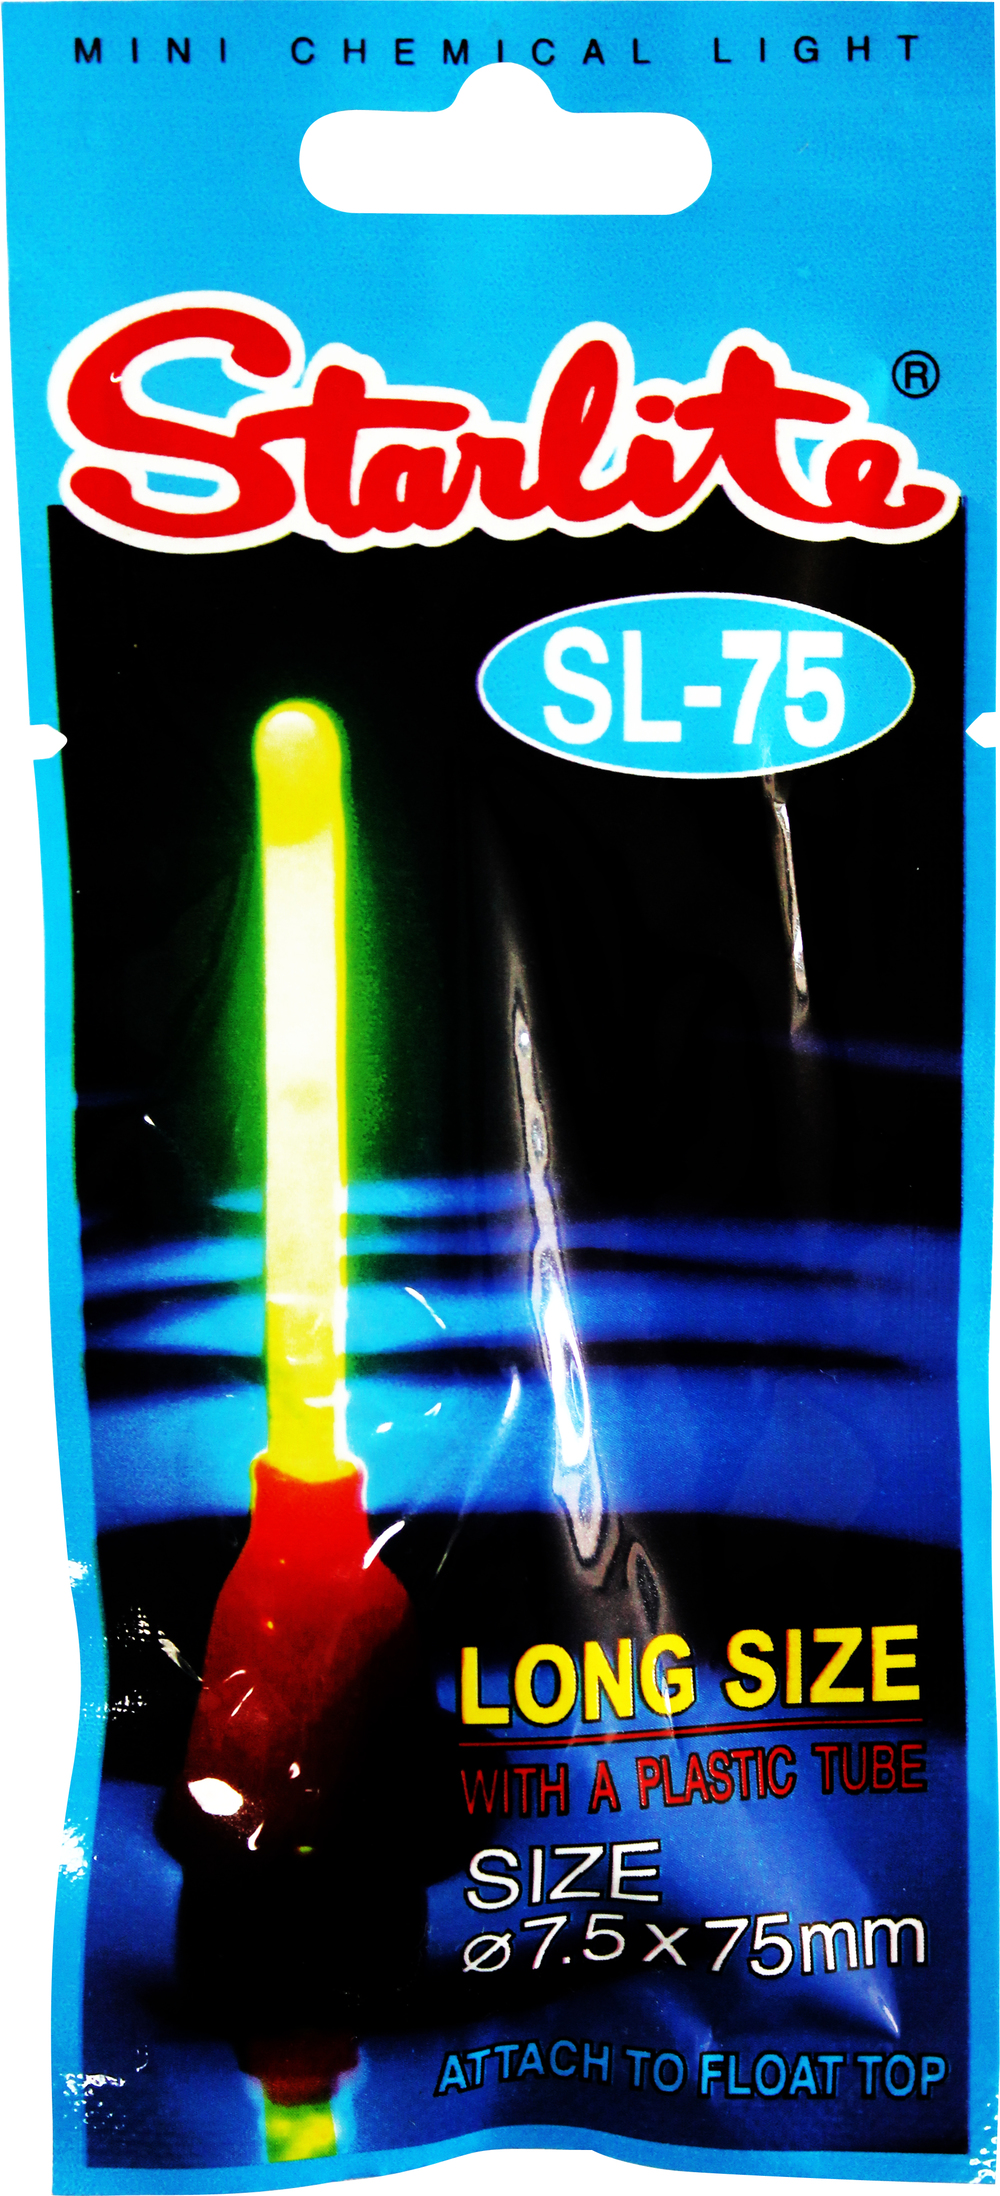 Extra Large Starlite Chemical Cliplight-Clip on Fishing Rod Tip